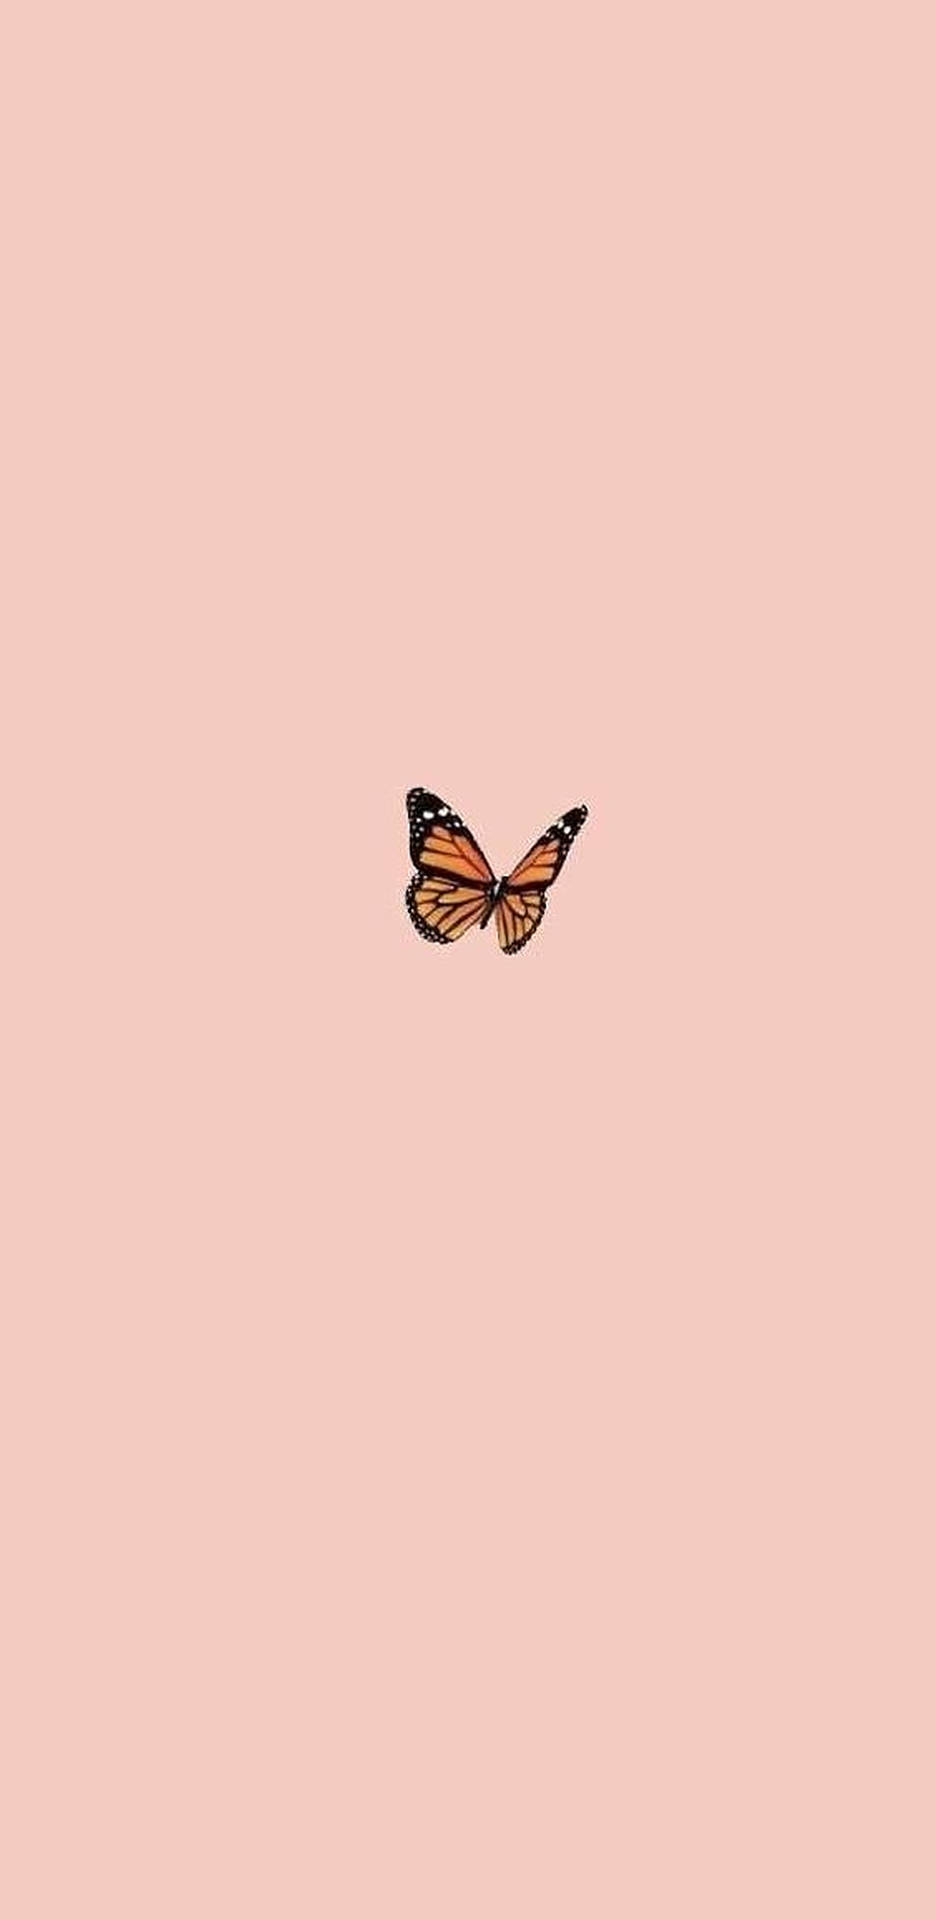 Iphone Aesthetic Butterfly